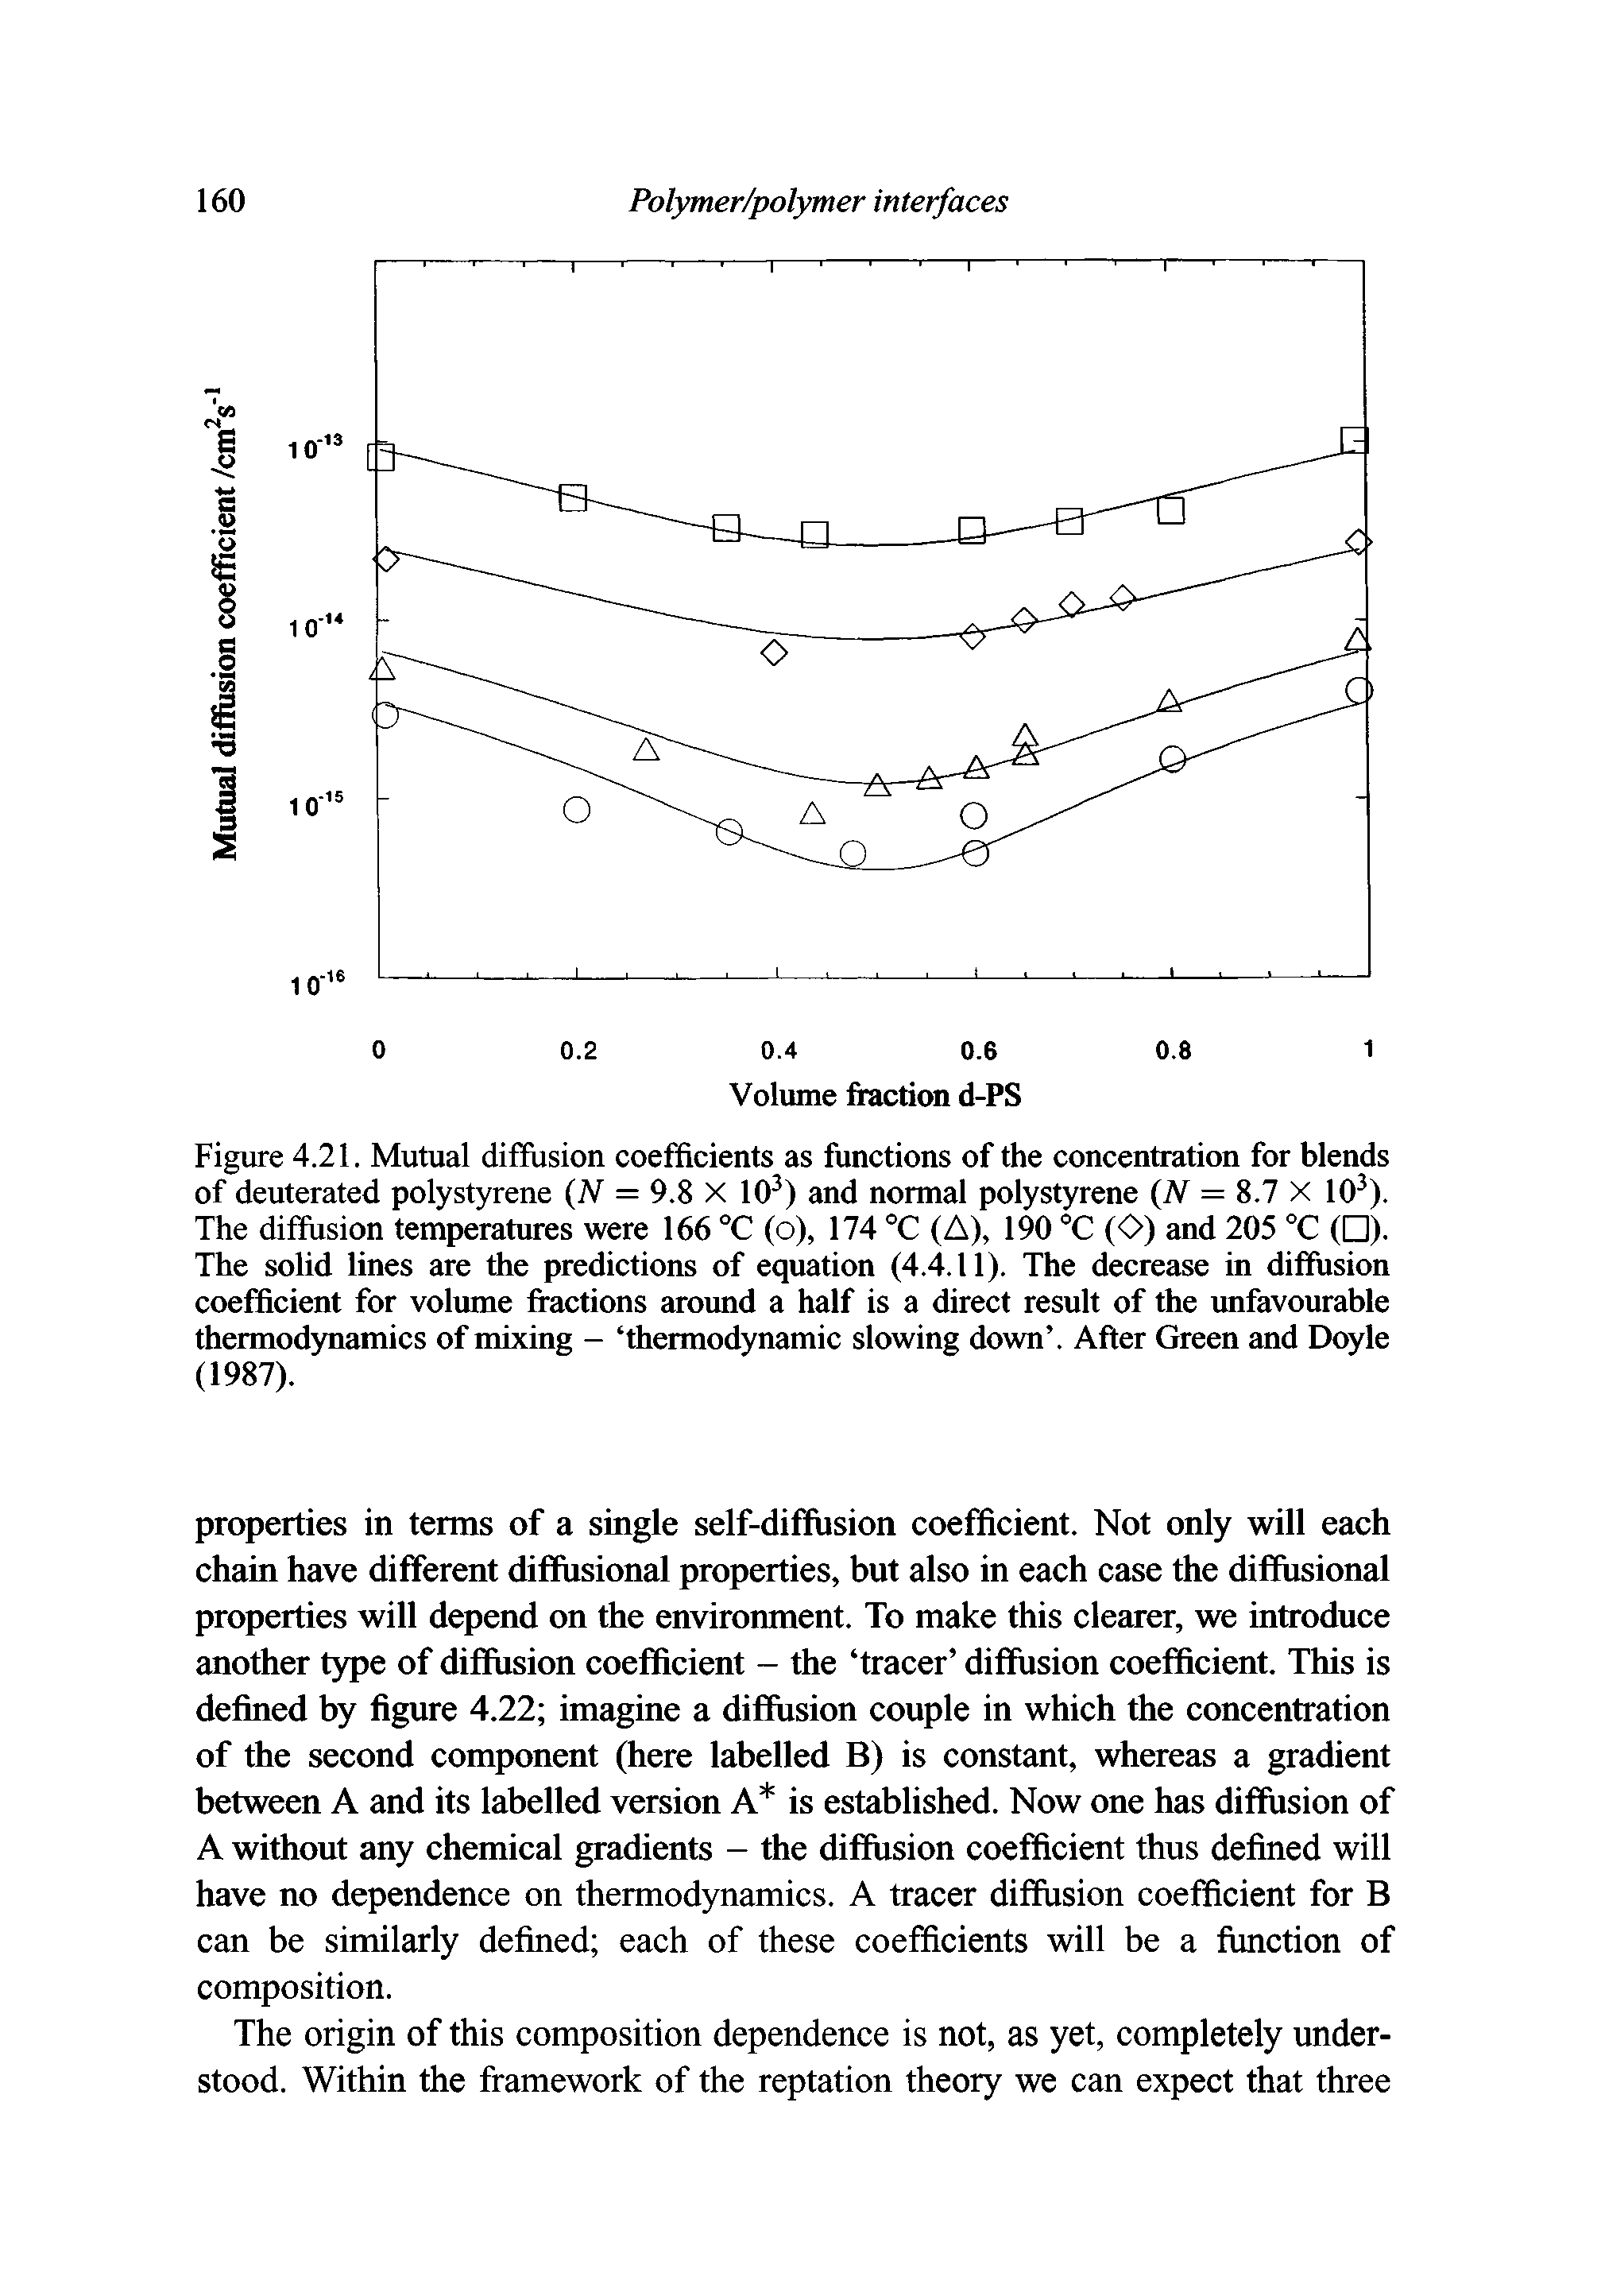 Figure 4.21. Mutual diffusion coefficients as functions of the concentration for blends of deuterated polystyrene N = 9.8 X 10 ) and normal polystyrene N = 8.7 X 10 ). The diffusion temperatures were 166 °C (o), 174 °C (A), 190 °C (O) and 205 °C ( ). The solid lines are the predictions of equation (4.4.11). The decrease in diffusion coefficient for volume fractions aroimd a half is a direct result of the unfavourable thermodynamies of mixing - thermodynamic slowing down . After Green and Doyle (1987).